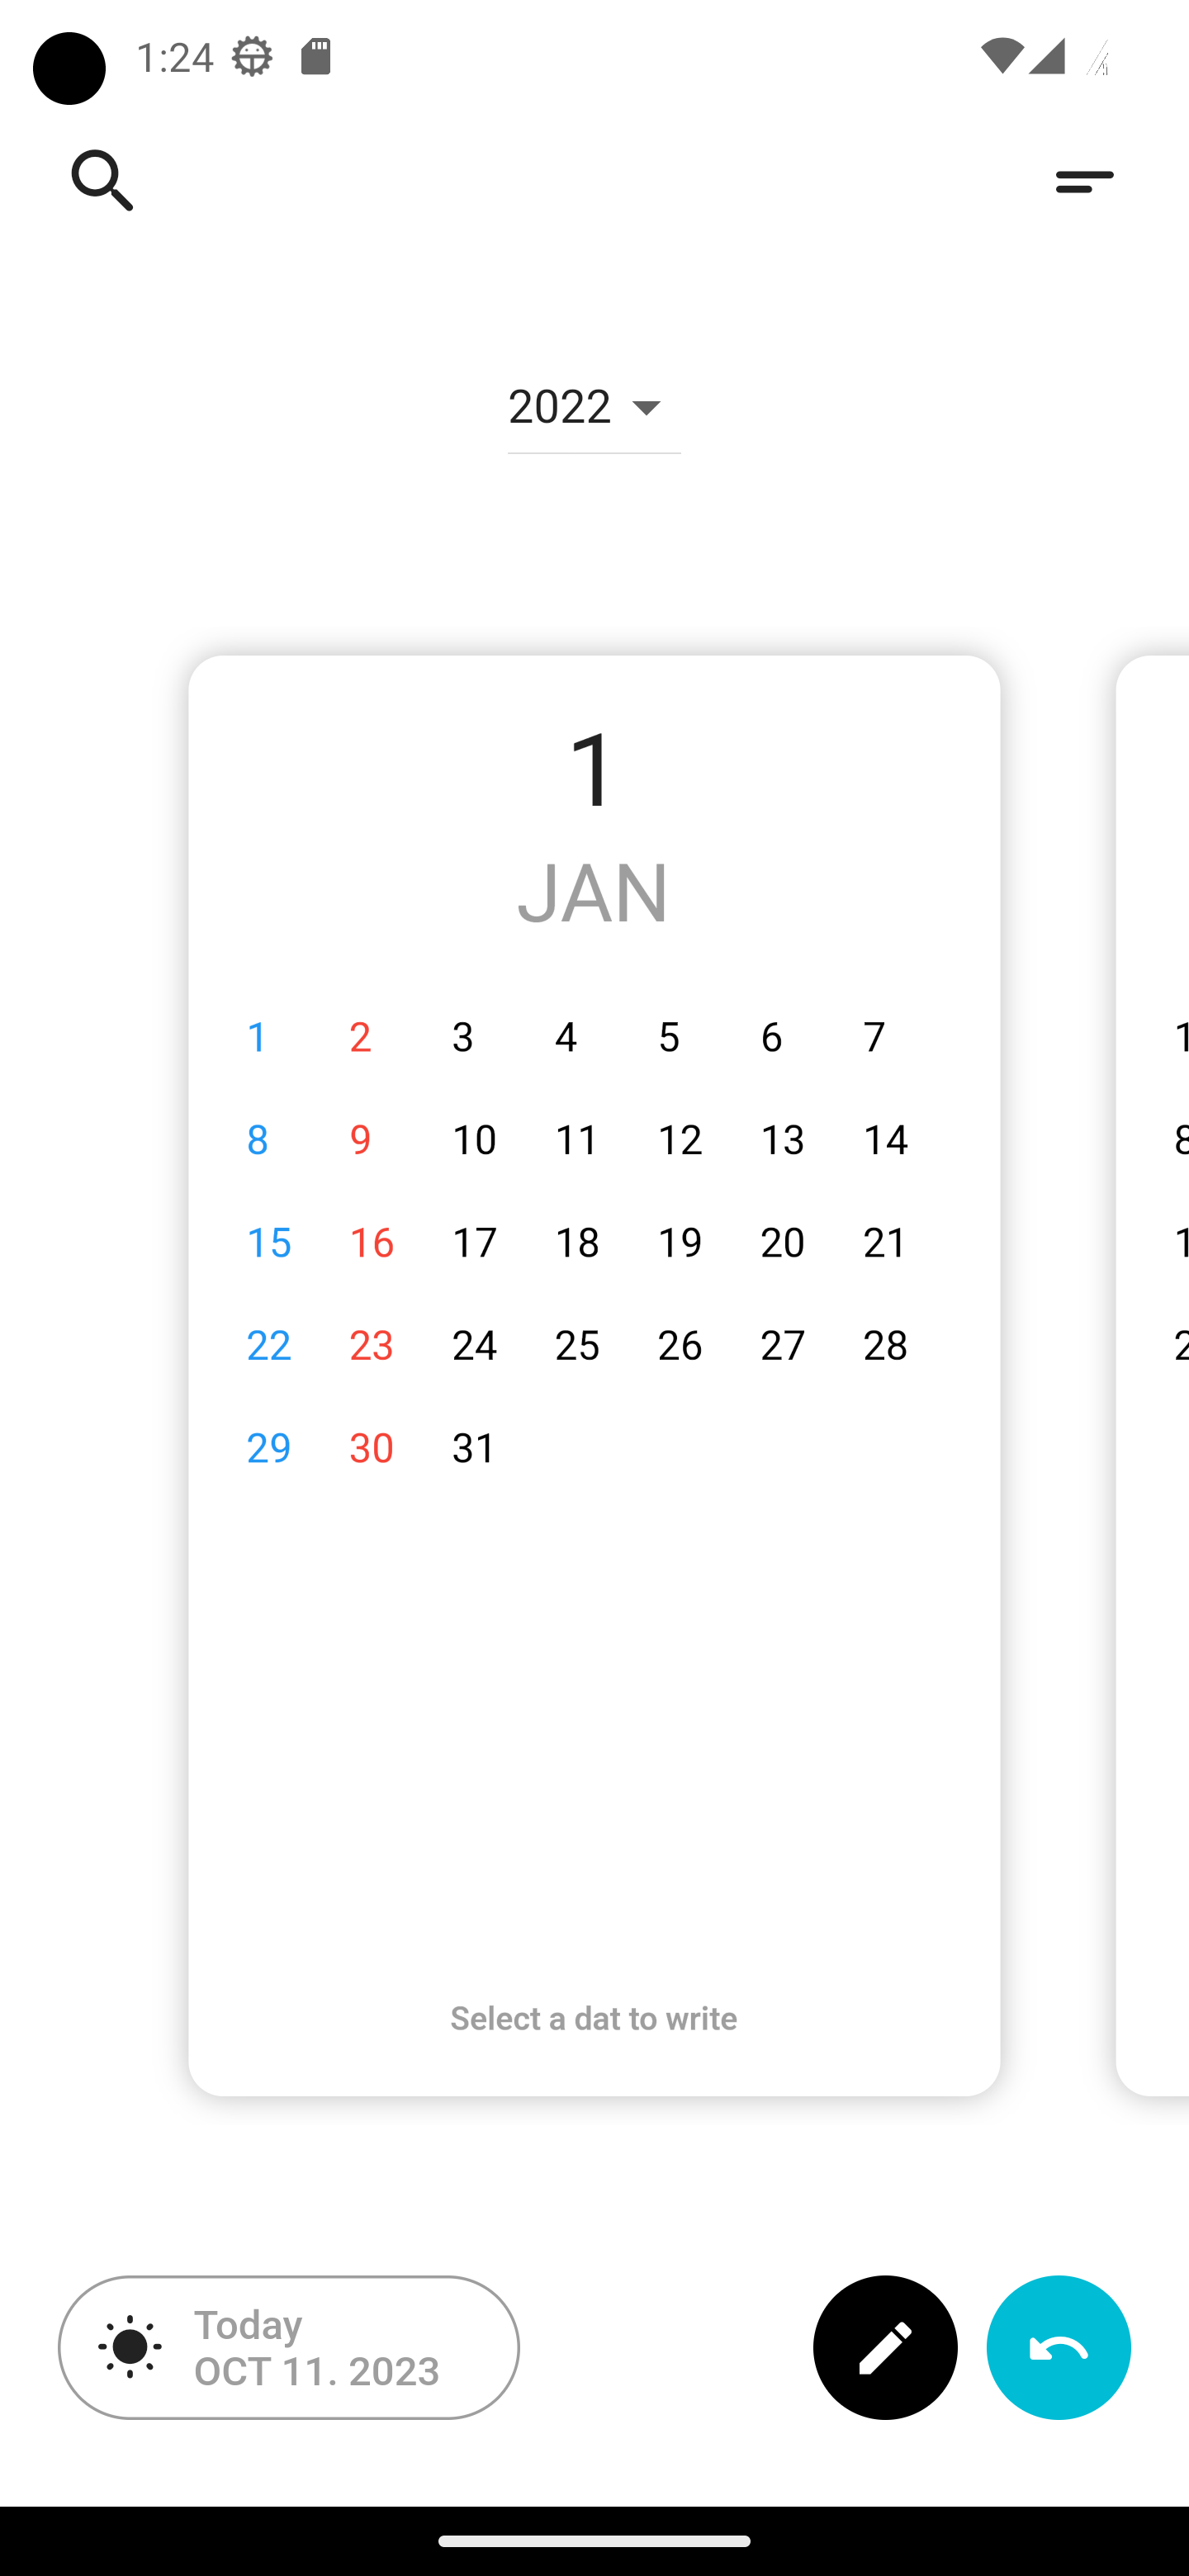 A calendar user interface design that features a clean and modern look